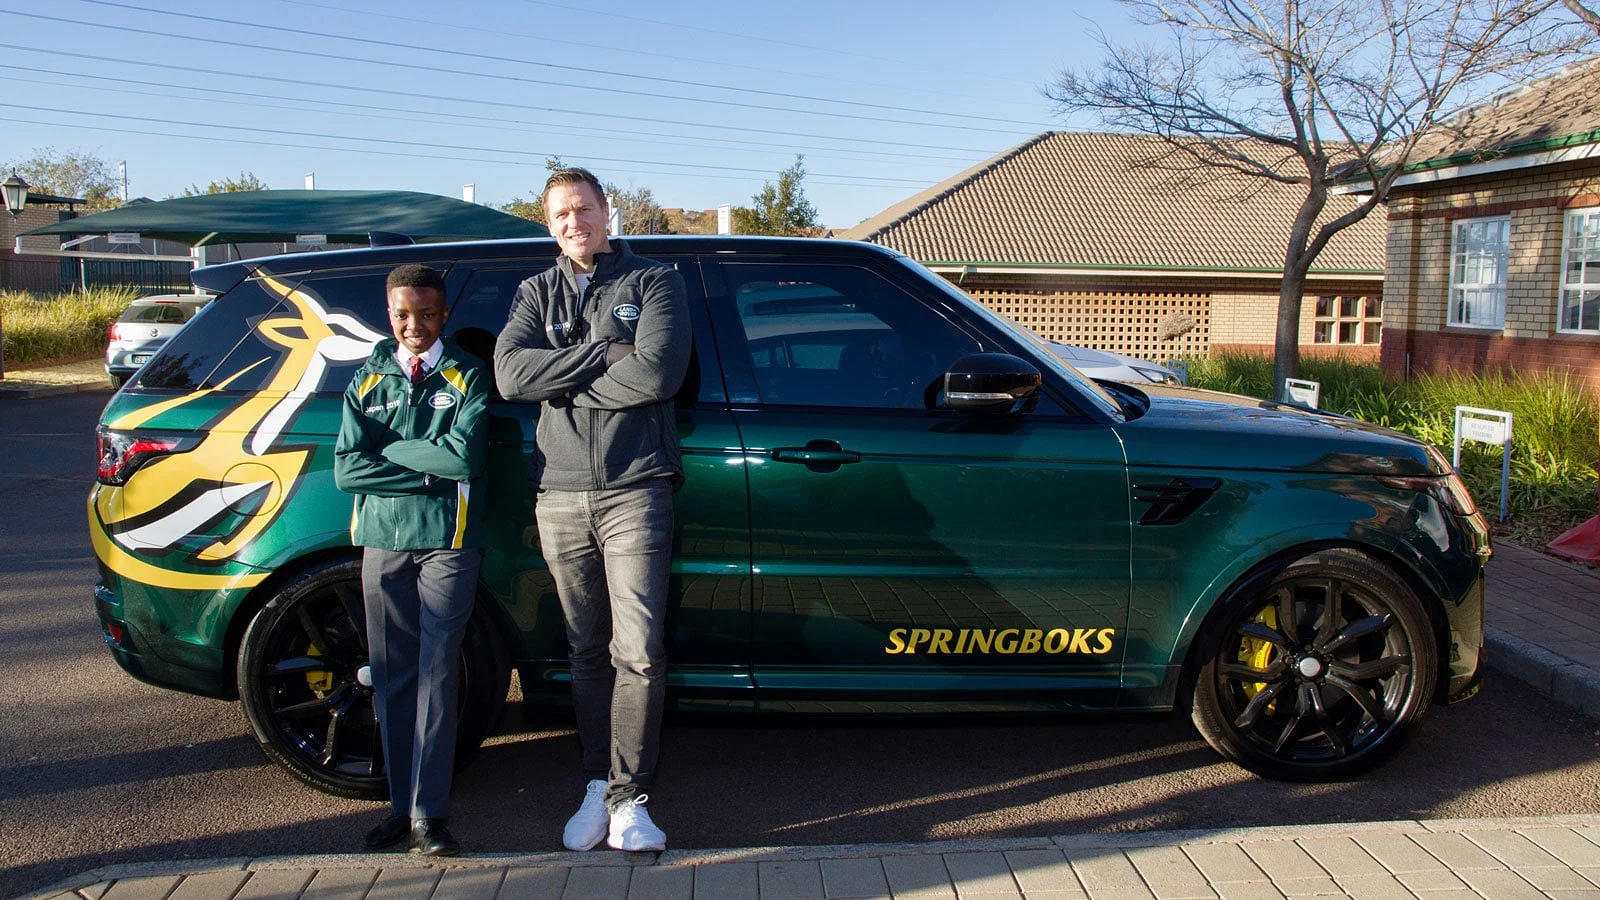 LAND ROVER RUGBY WORLD CUP 2019 MASCOT PROGRAMME